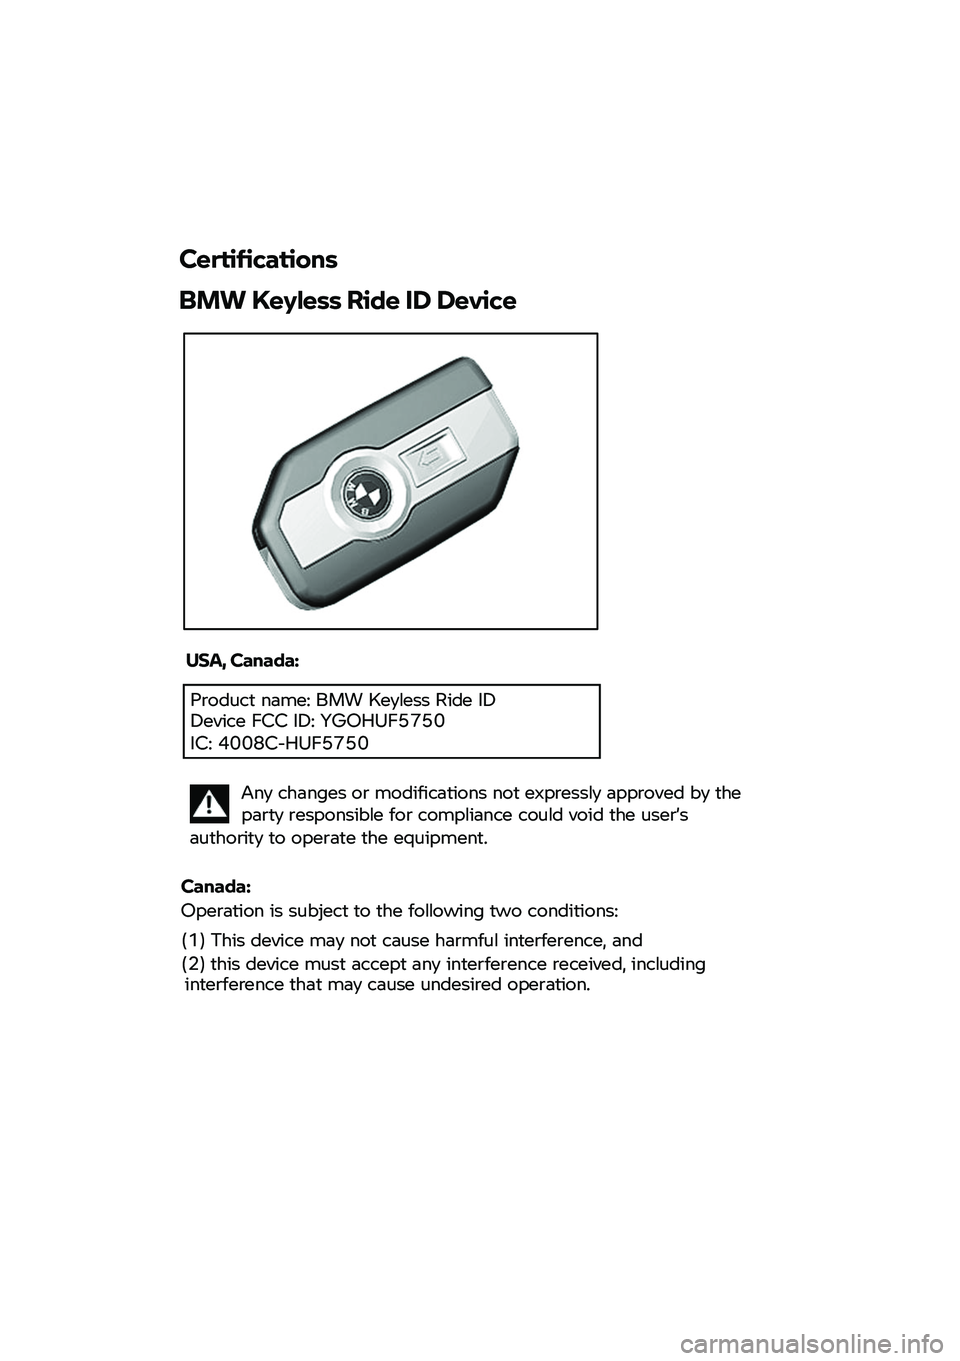 BMW MOTORRAD CE 04 2021  Livret de bord (in French)  
 
 
 
Certifications 
BMW Keyless Ride ID Device  
 
USA, Canada:  
  
Any changes or modifications not expressly approved by the party responsible for compliance could void the user’s 
authority 